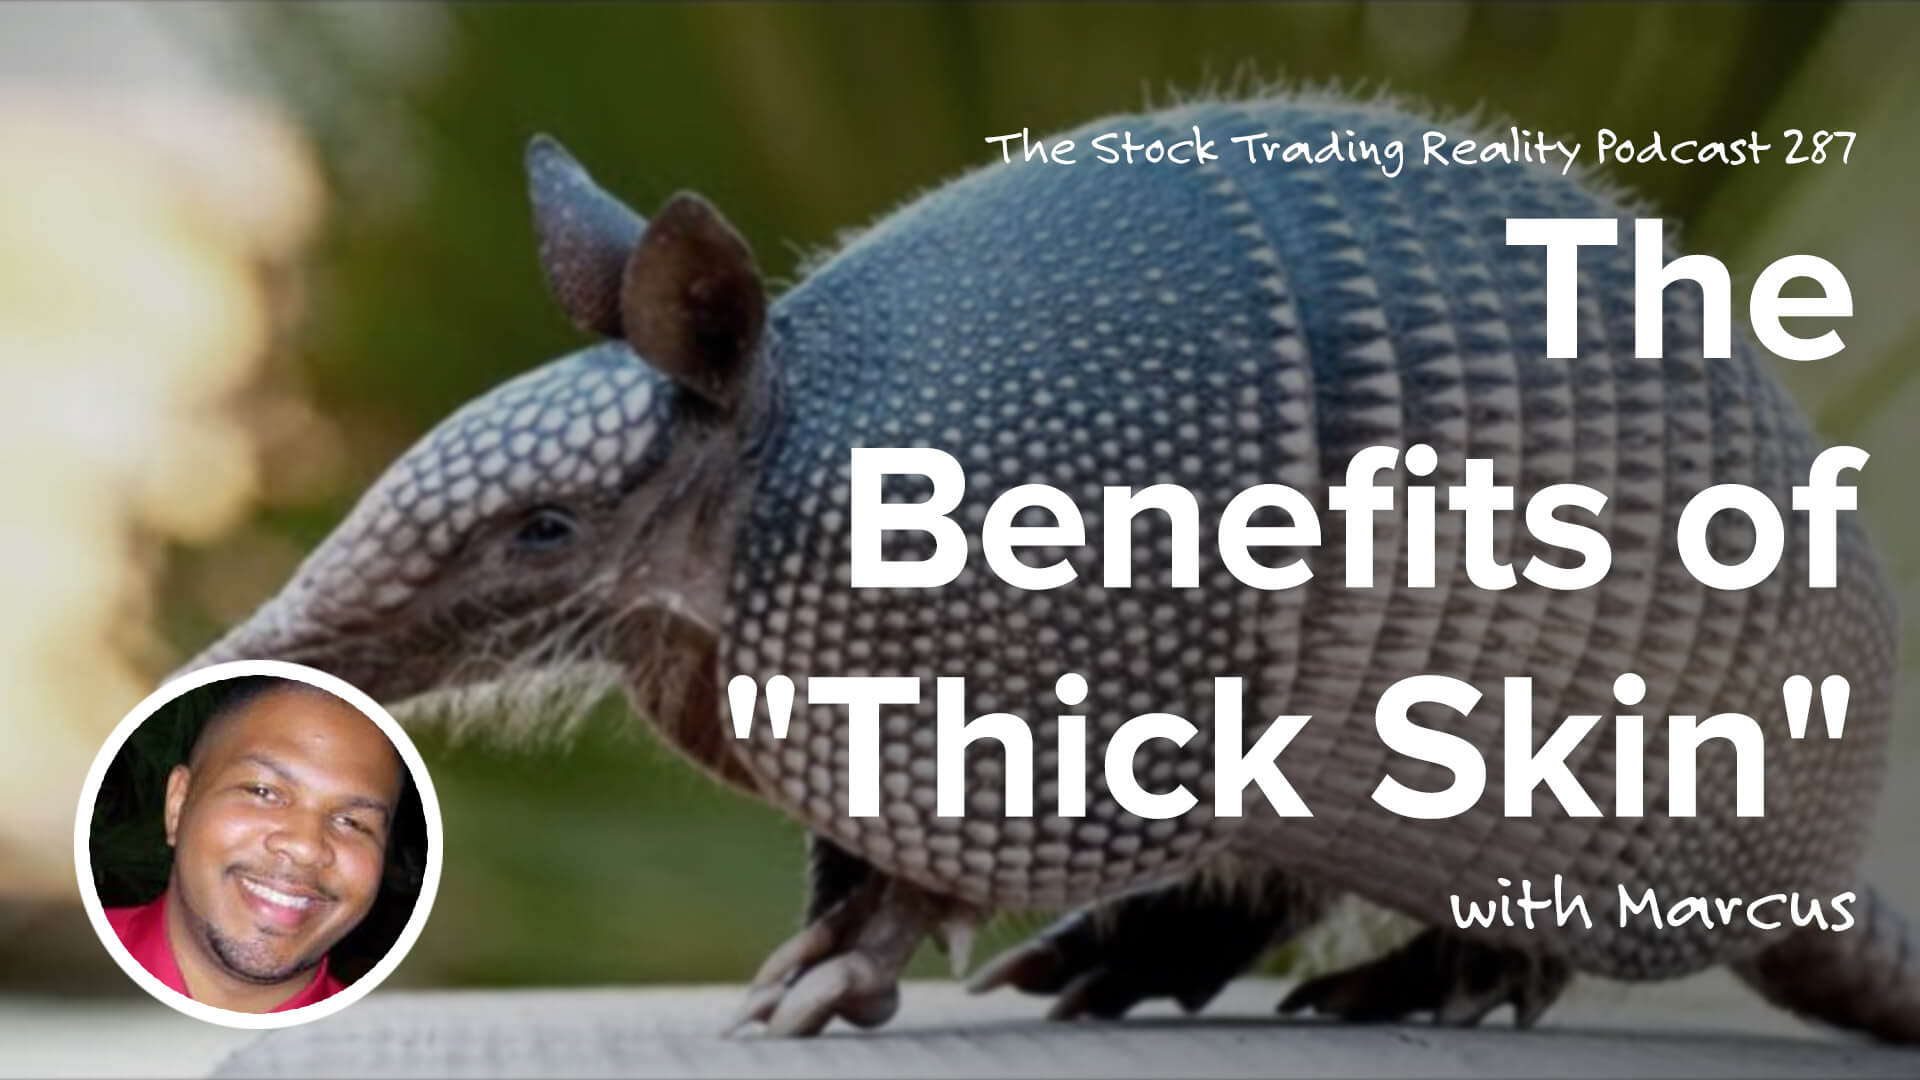 The Benefits of "Thick Skin"